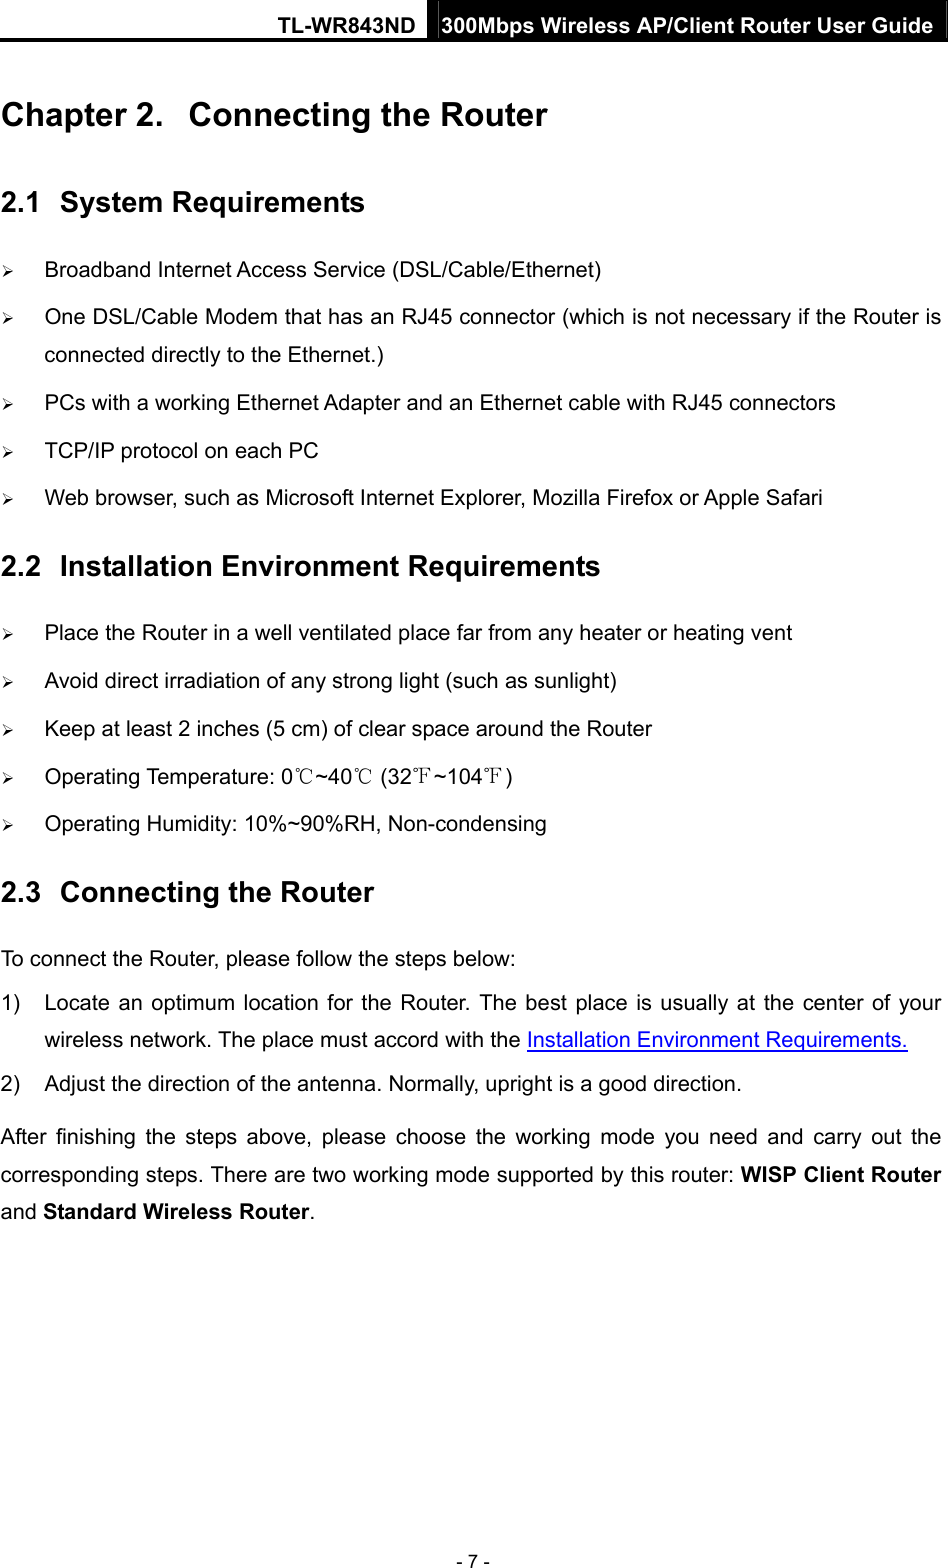 TL-WR843ND 300Mbps Wireless AP/Client Router User Guide - 7 - Chapter 2.  Connecting the Router 2.1  System Requirements  Broadband Internet Access Service (DSL/Cable/Ethernet)  One DSL/Cable Modem that has an RJ45 connector (which is not necessary if the Router is connected directly to the Ethernet.)  PCs with a working Ethernet Adapter and an Ethernet cable with RJ45 connectors    TCP/IP protocol on each PC  Web browser, such as Microsoft Internet Explorer, Mozilla Firefox or Apple Safari 2.2  Installation Environment Requirements  Place the Router in a well ventilated place far from any heater or heating vent    Avoid direct irradiation of any strong light (such as sunlight)  Keep at least 2 inches (5 cm) of clear space around the Router  Operating Temperature: 0 ~40  (32 ~104 )   Operating Humidity: 10%~90%RH, Non-condensing 2.3  Connecting the Router To connect the Router, please follow the steps below: 1)  Locate an optimum location for the Router. The best place is usually at the center of your wireless network. The place must accord with the Installation Environment Requirements. 2)  Adjust the direction of the antenna. Normally, upright is a good direction. After finishing the steps above, please choose the working mode you need and carry out the corresponding steps. There are two working mode supported by this router: WISP Client Router and Standard Wireless Router.  